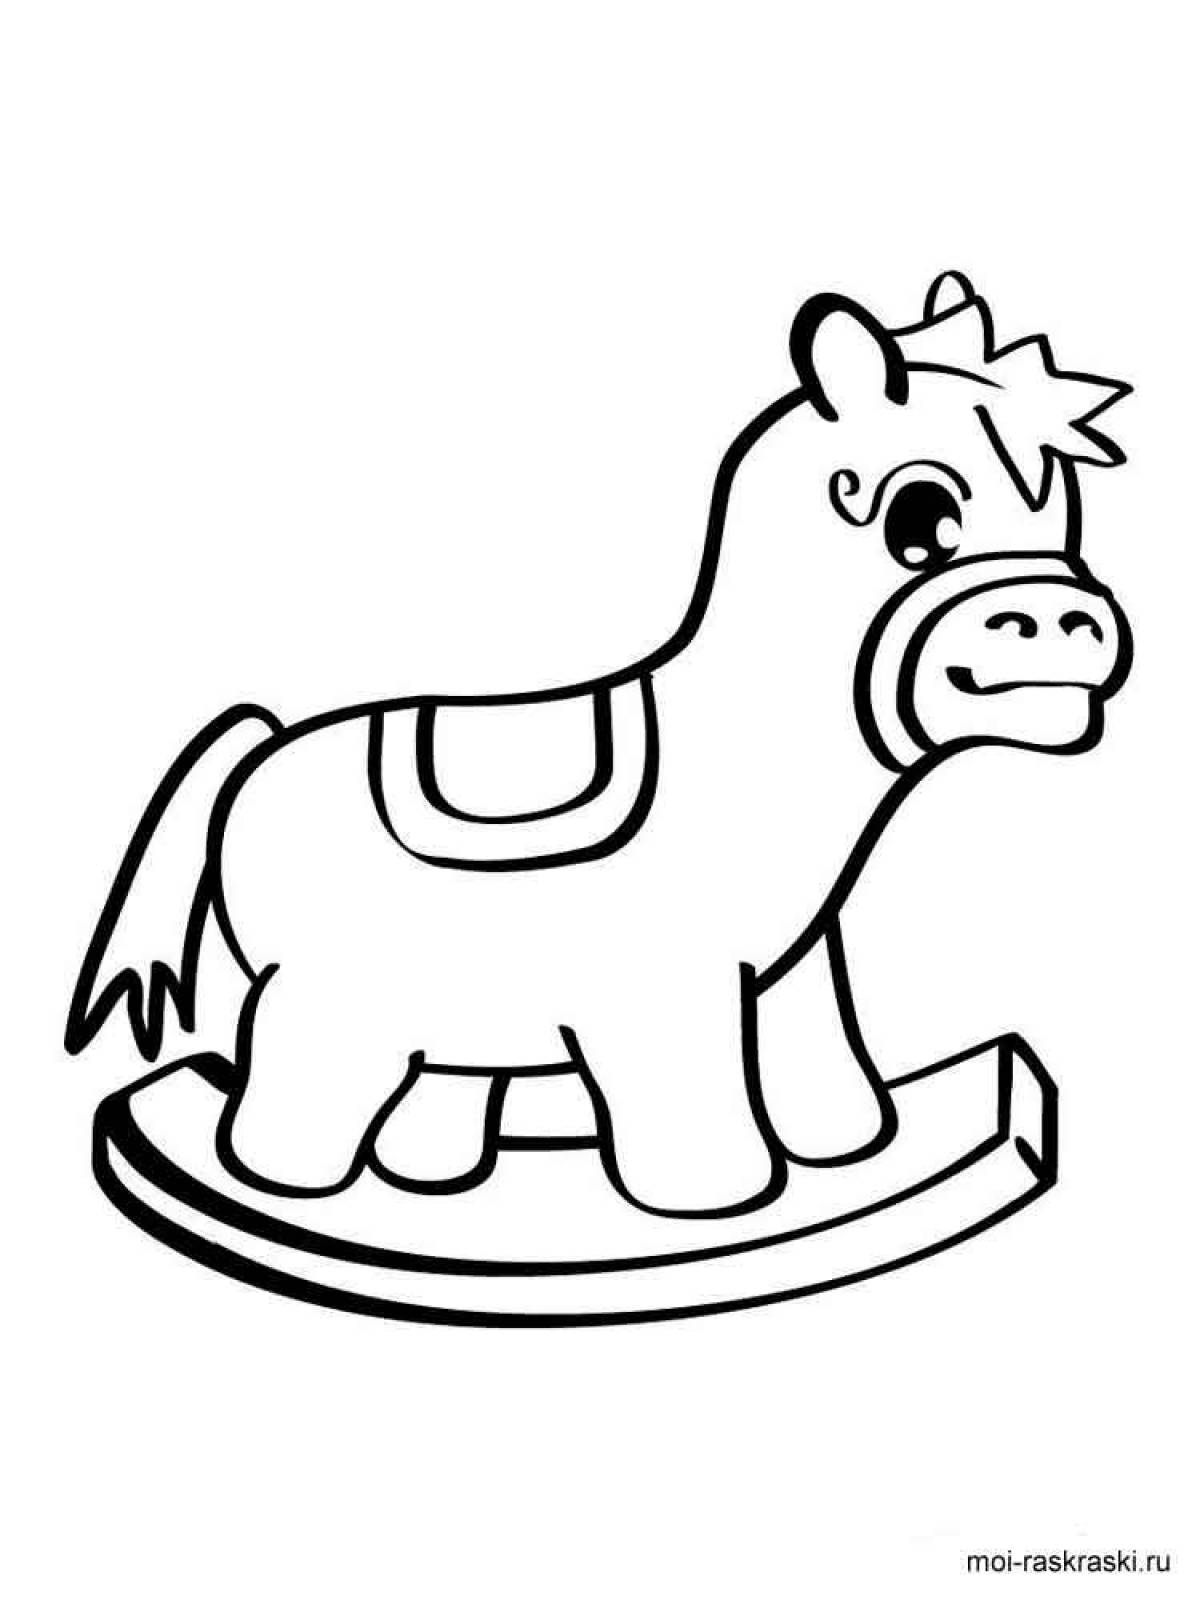 Glowing horse coloring book for 3-4 year olds